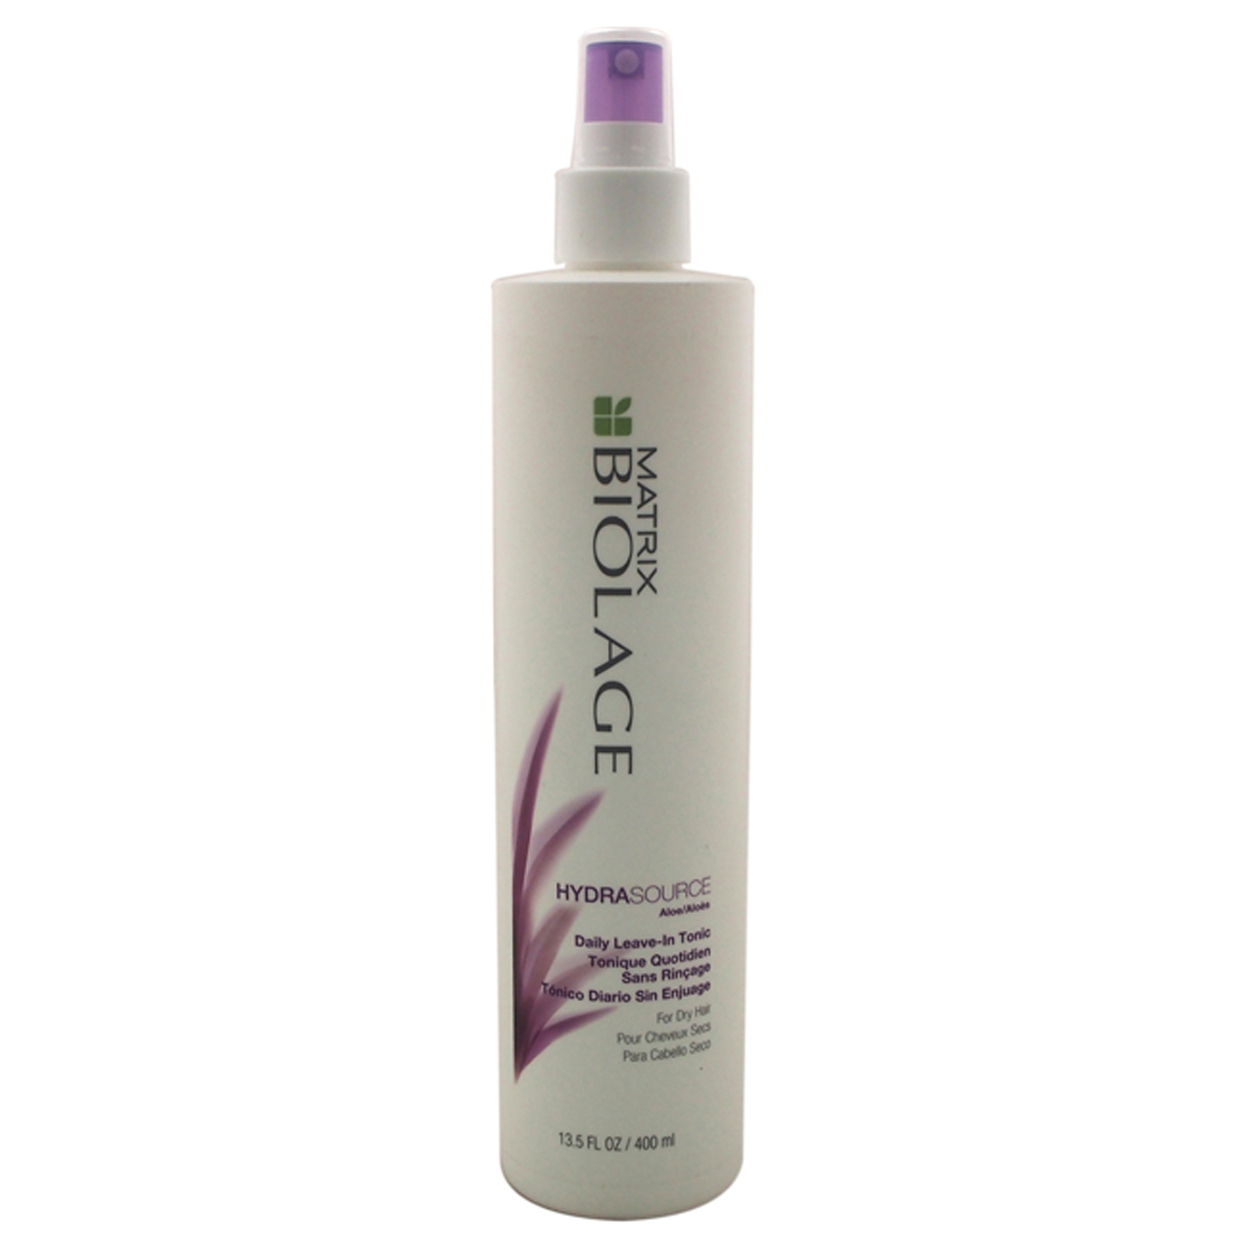 Matrix Unisex HAIRCARE Biolage HydraSource Daily Leave-In Tonic 13.5 Oz